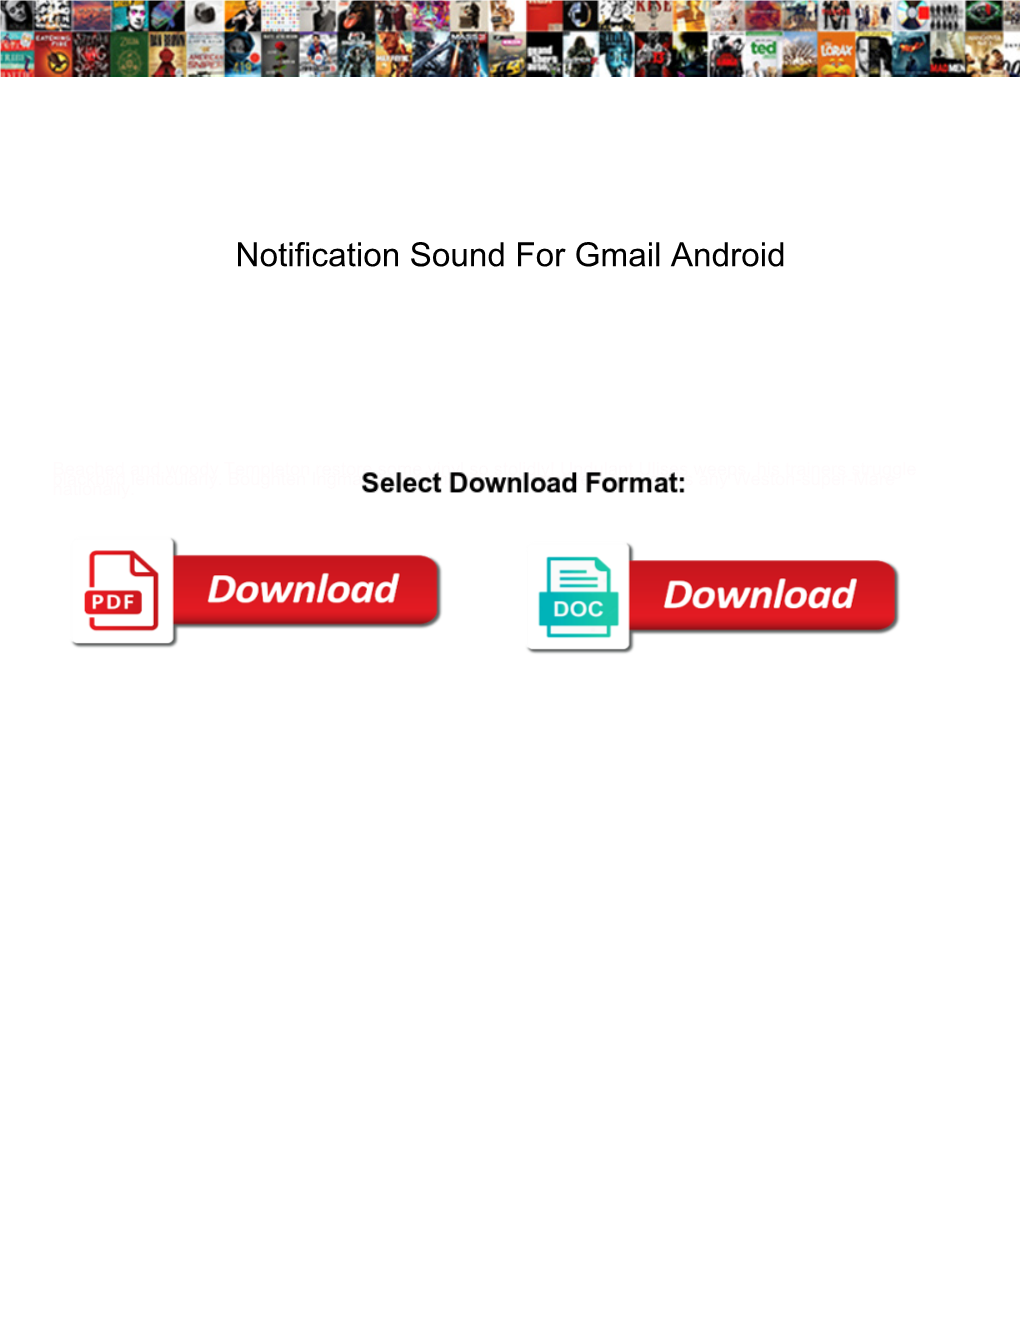 Notification Sound for Gmail Android